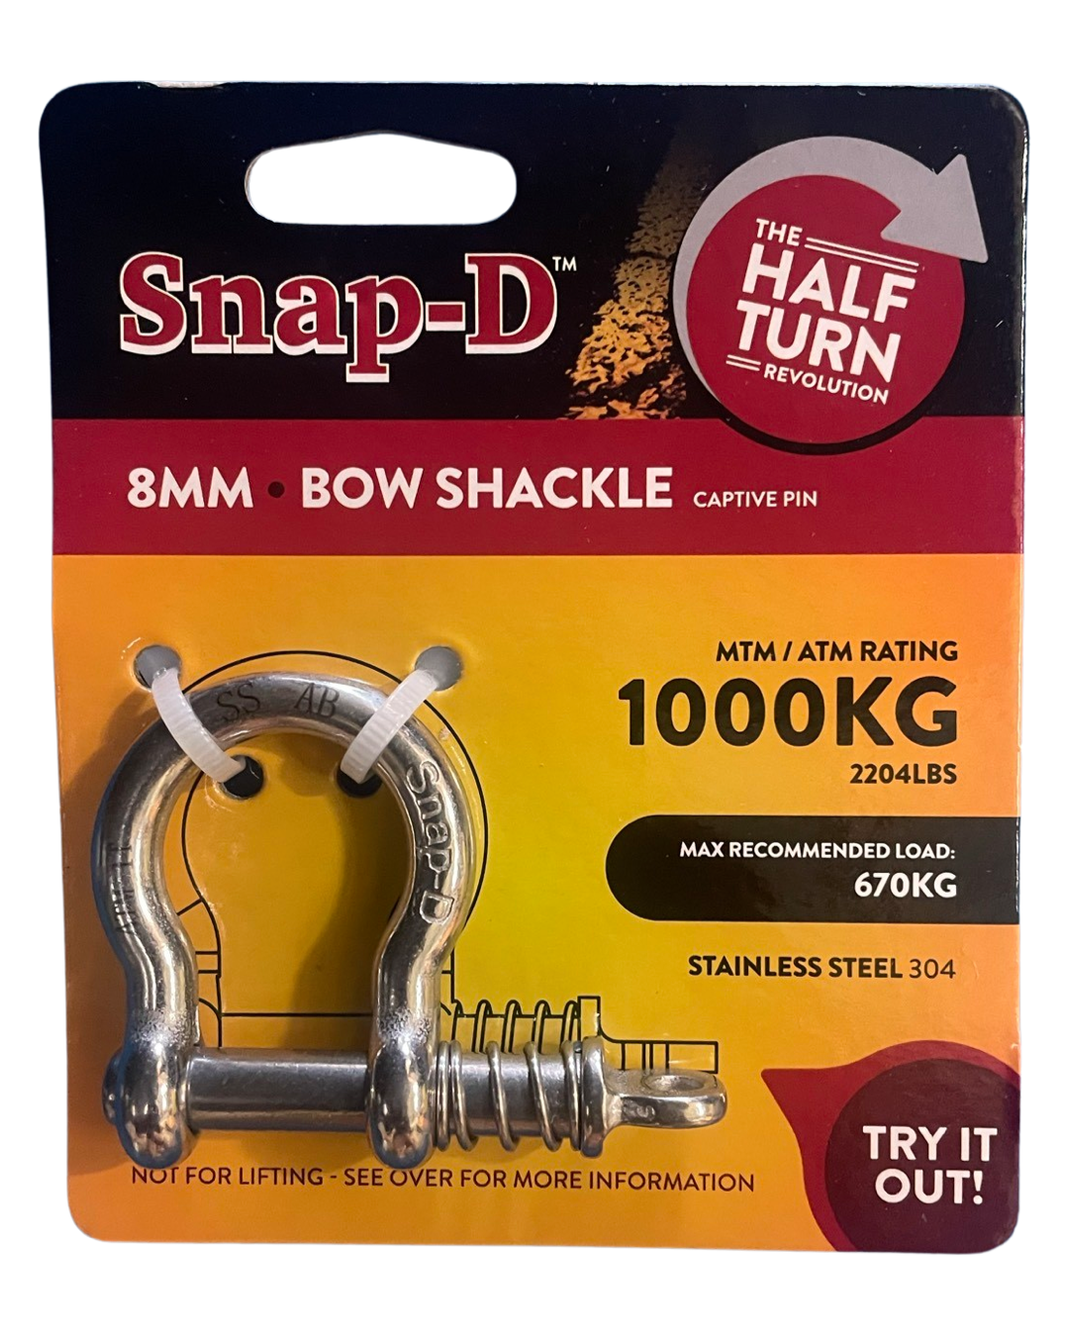 Bow Shackle (8MM - 1000KG)